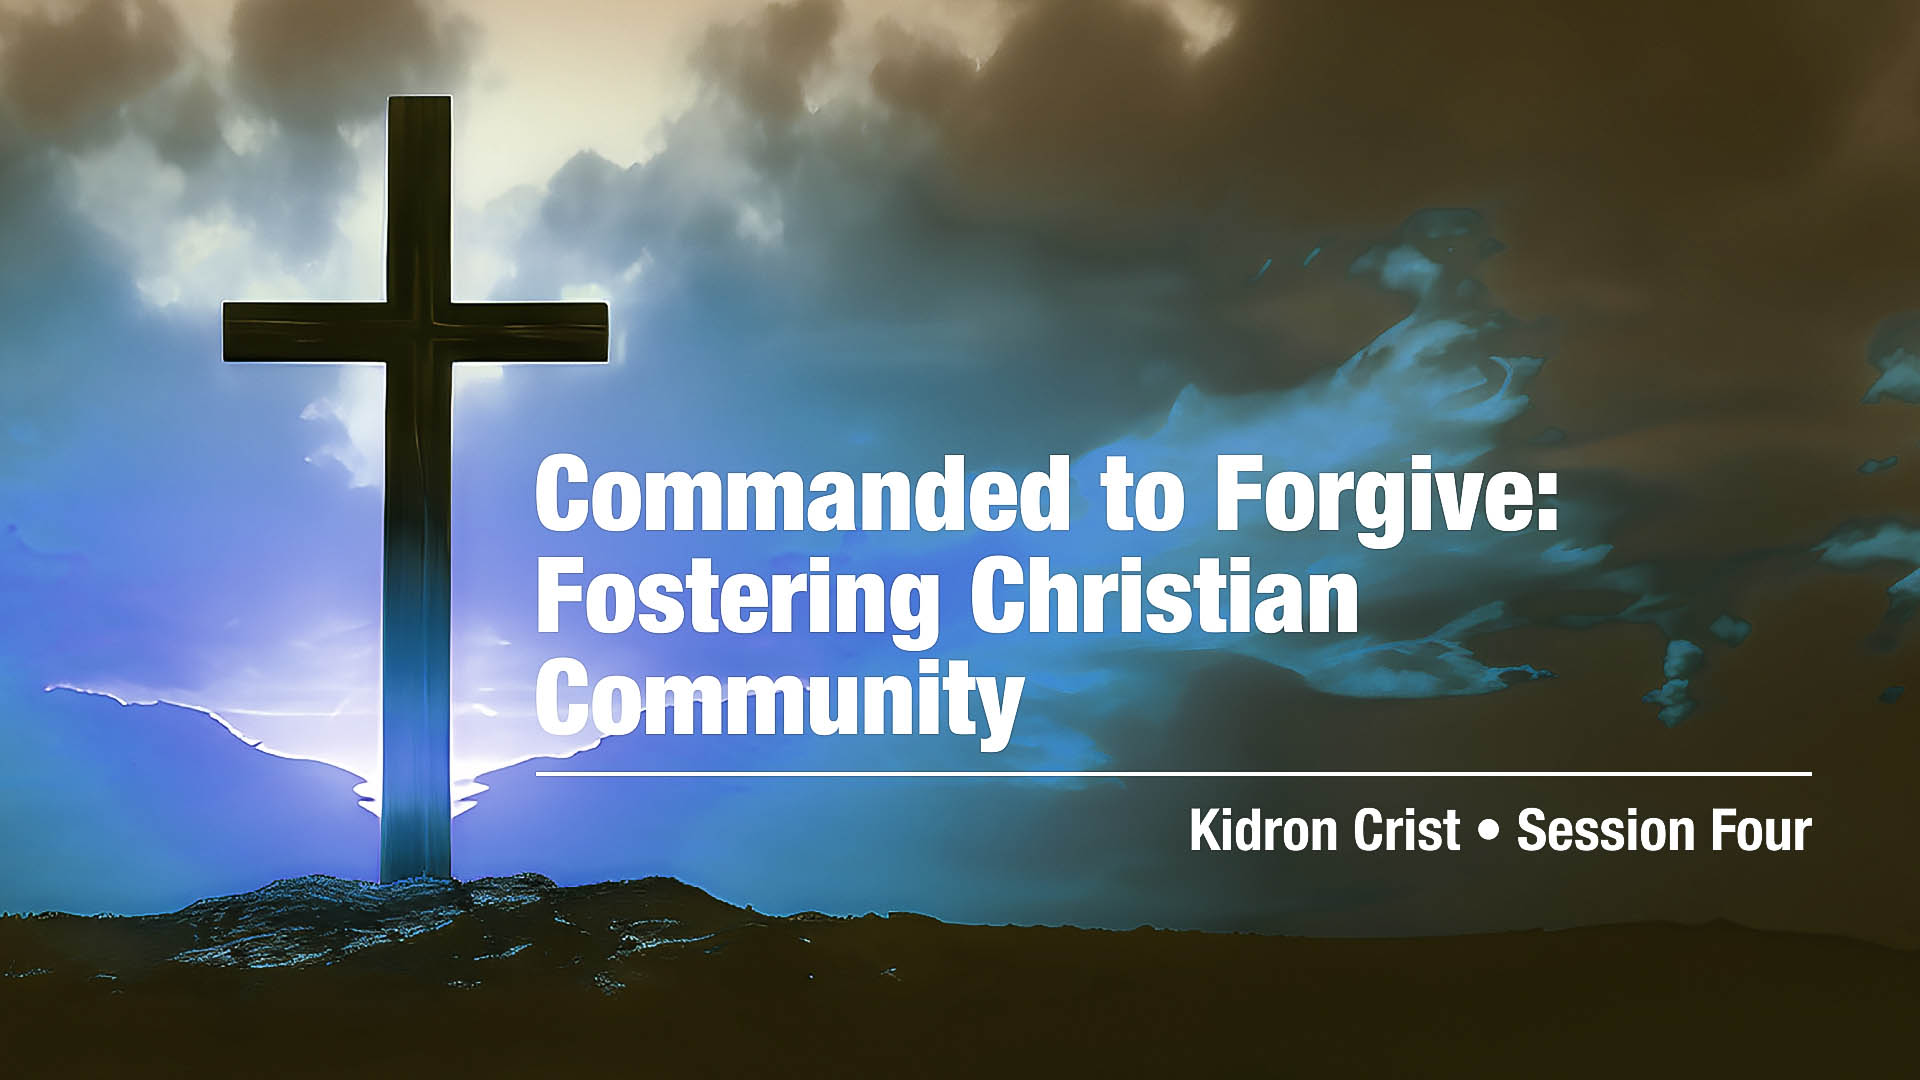 Dunkard Brethren Church| Leadership Conference | Commanded To Forgive: Fostering Christian Community